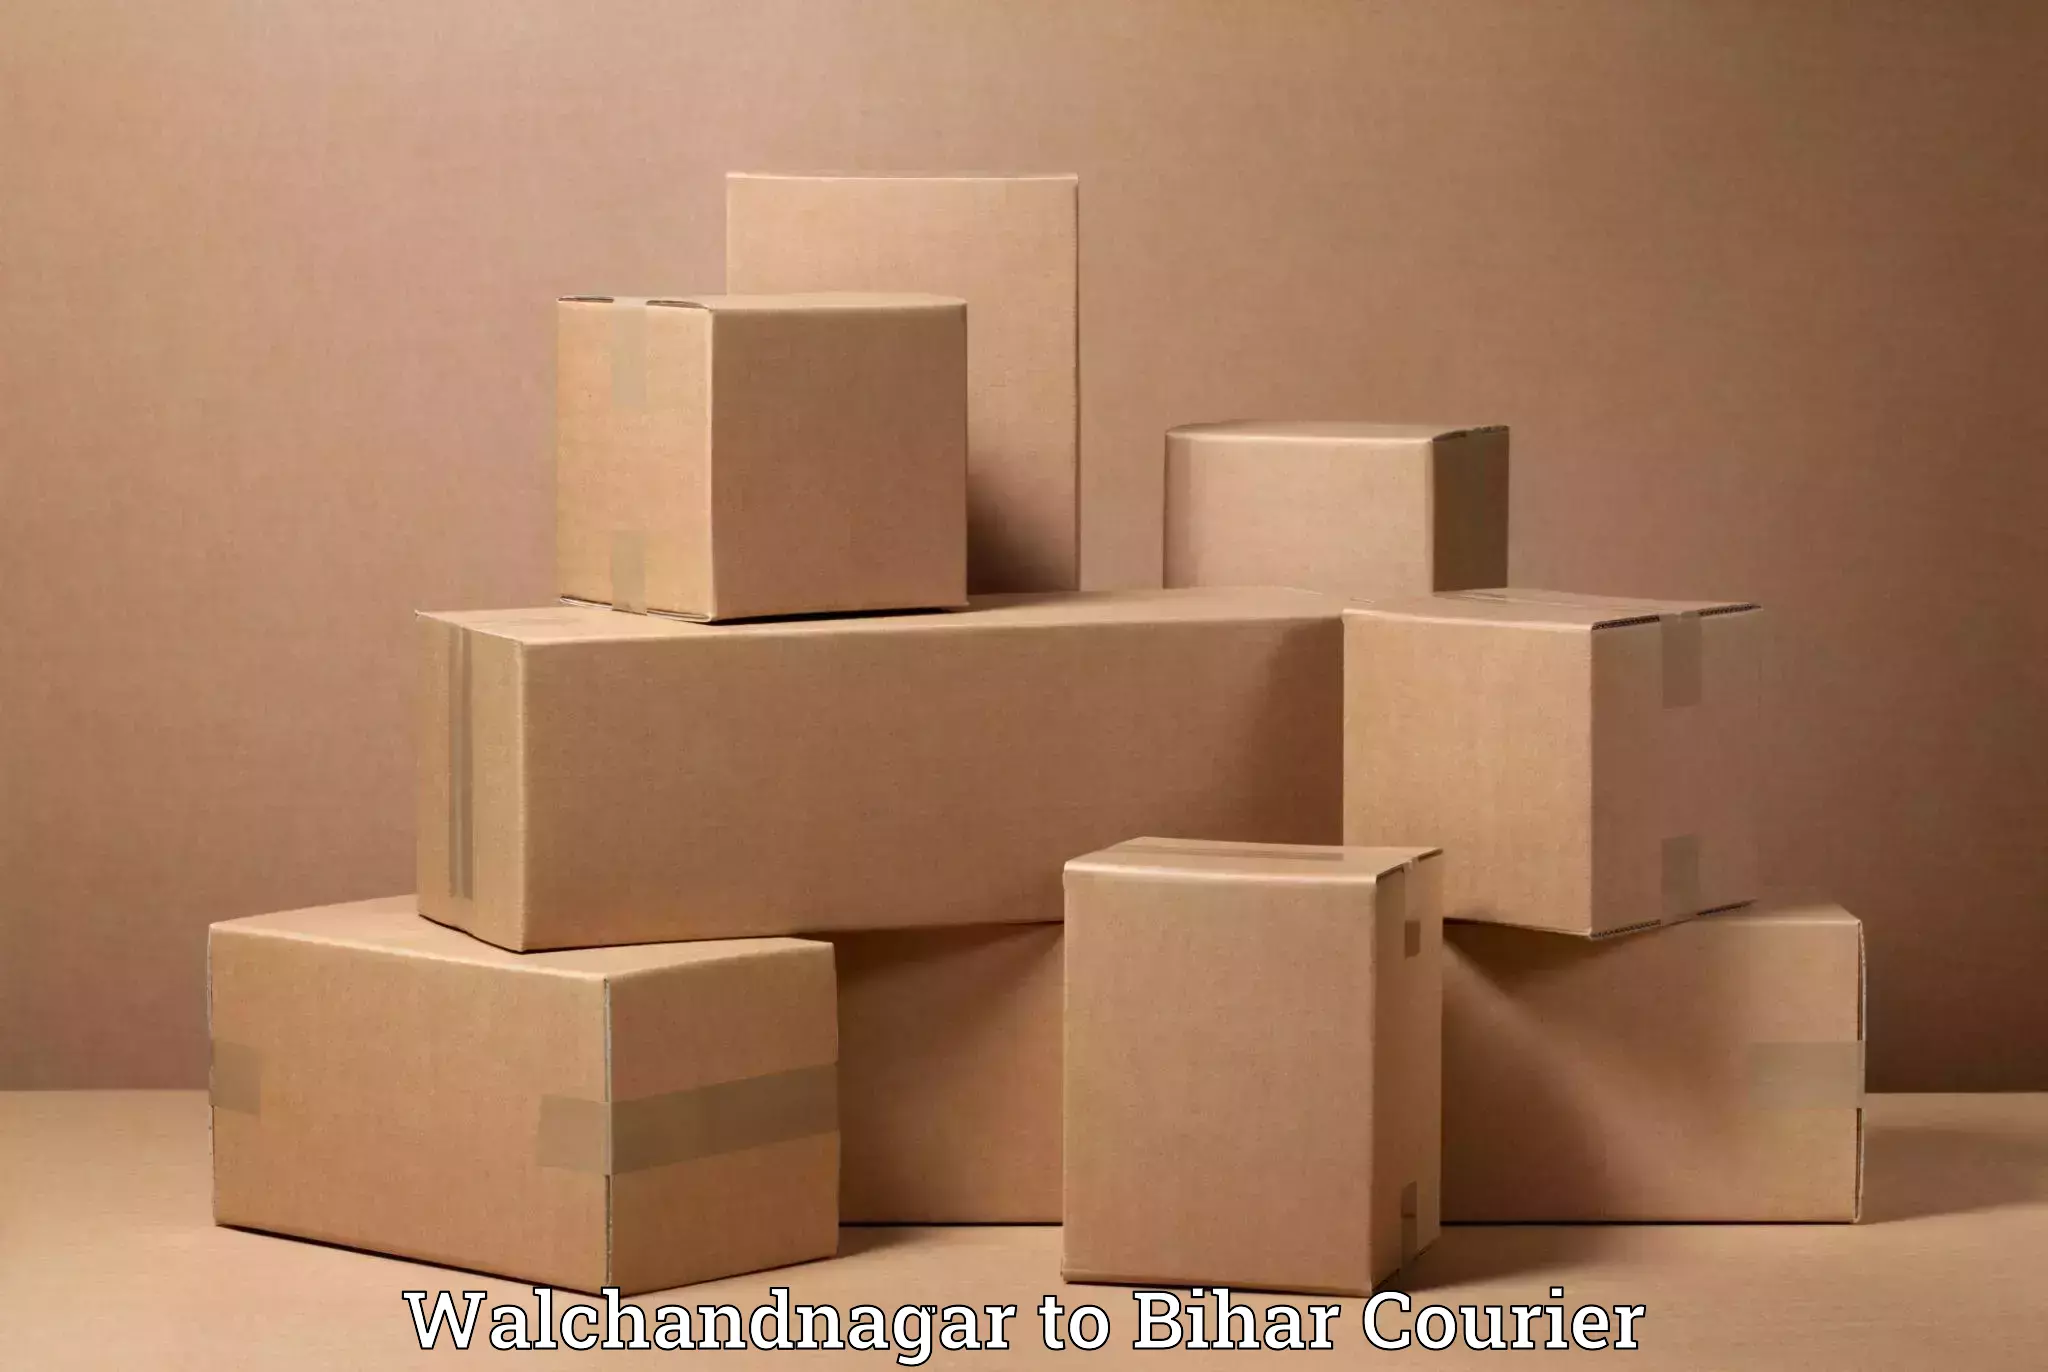 Trusted household movers Walchandnagar to Hasanpura